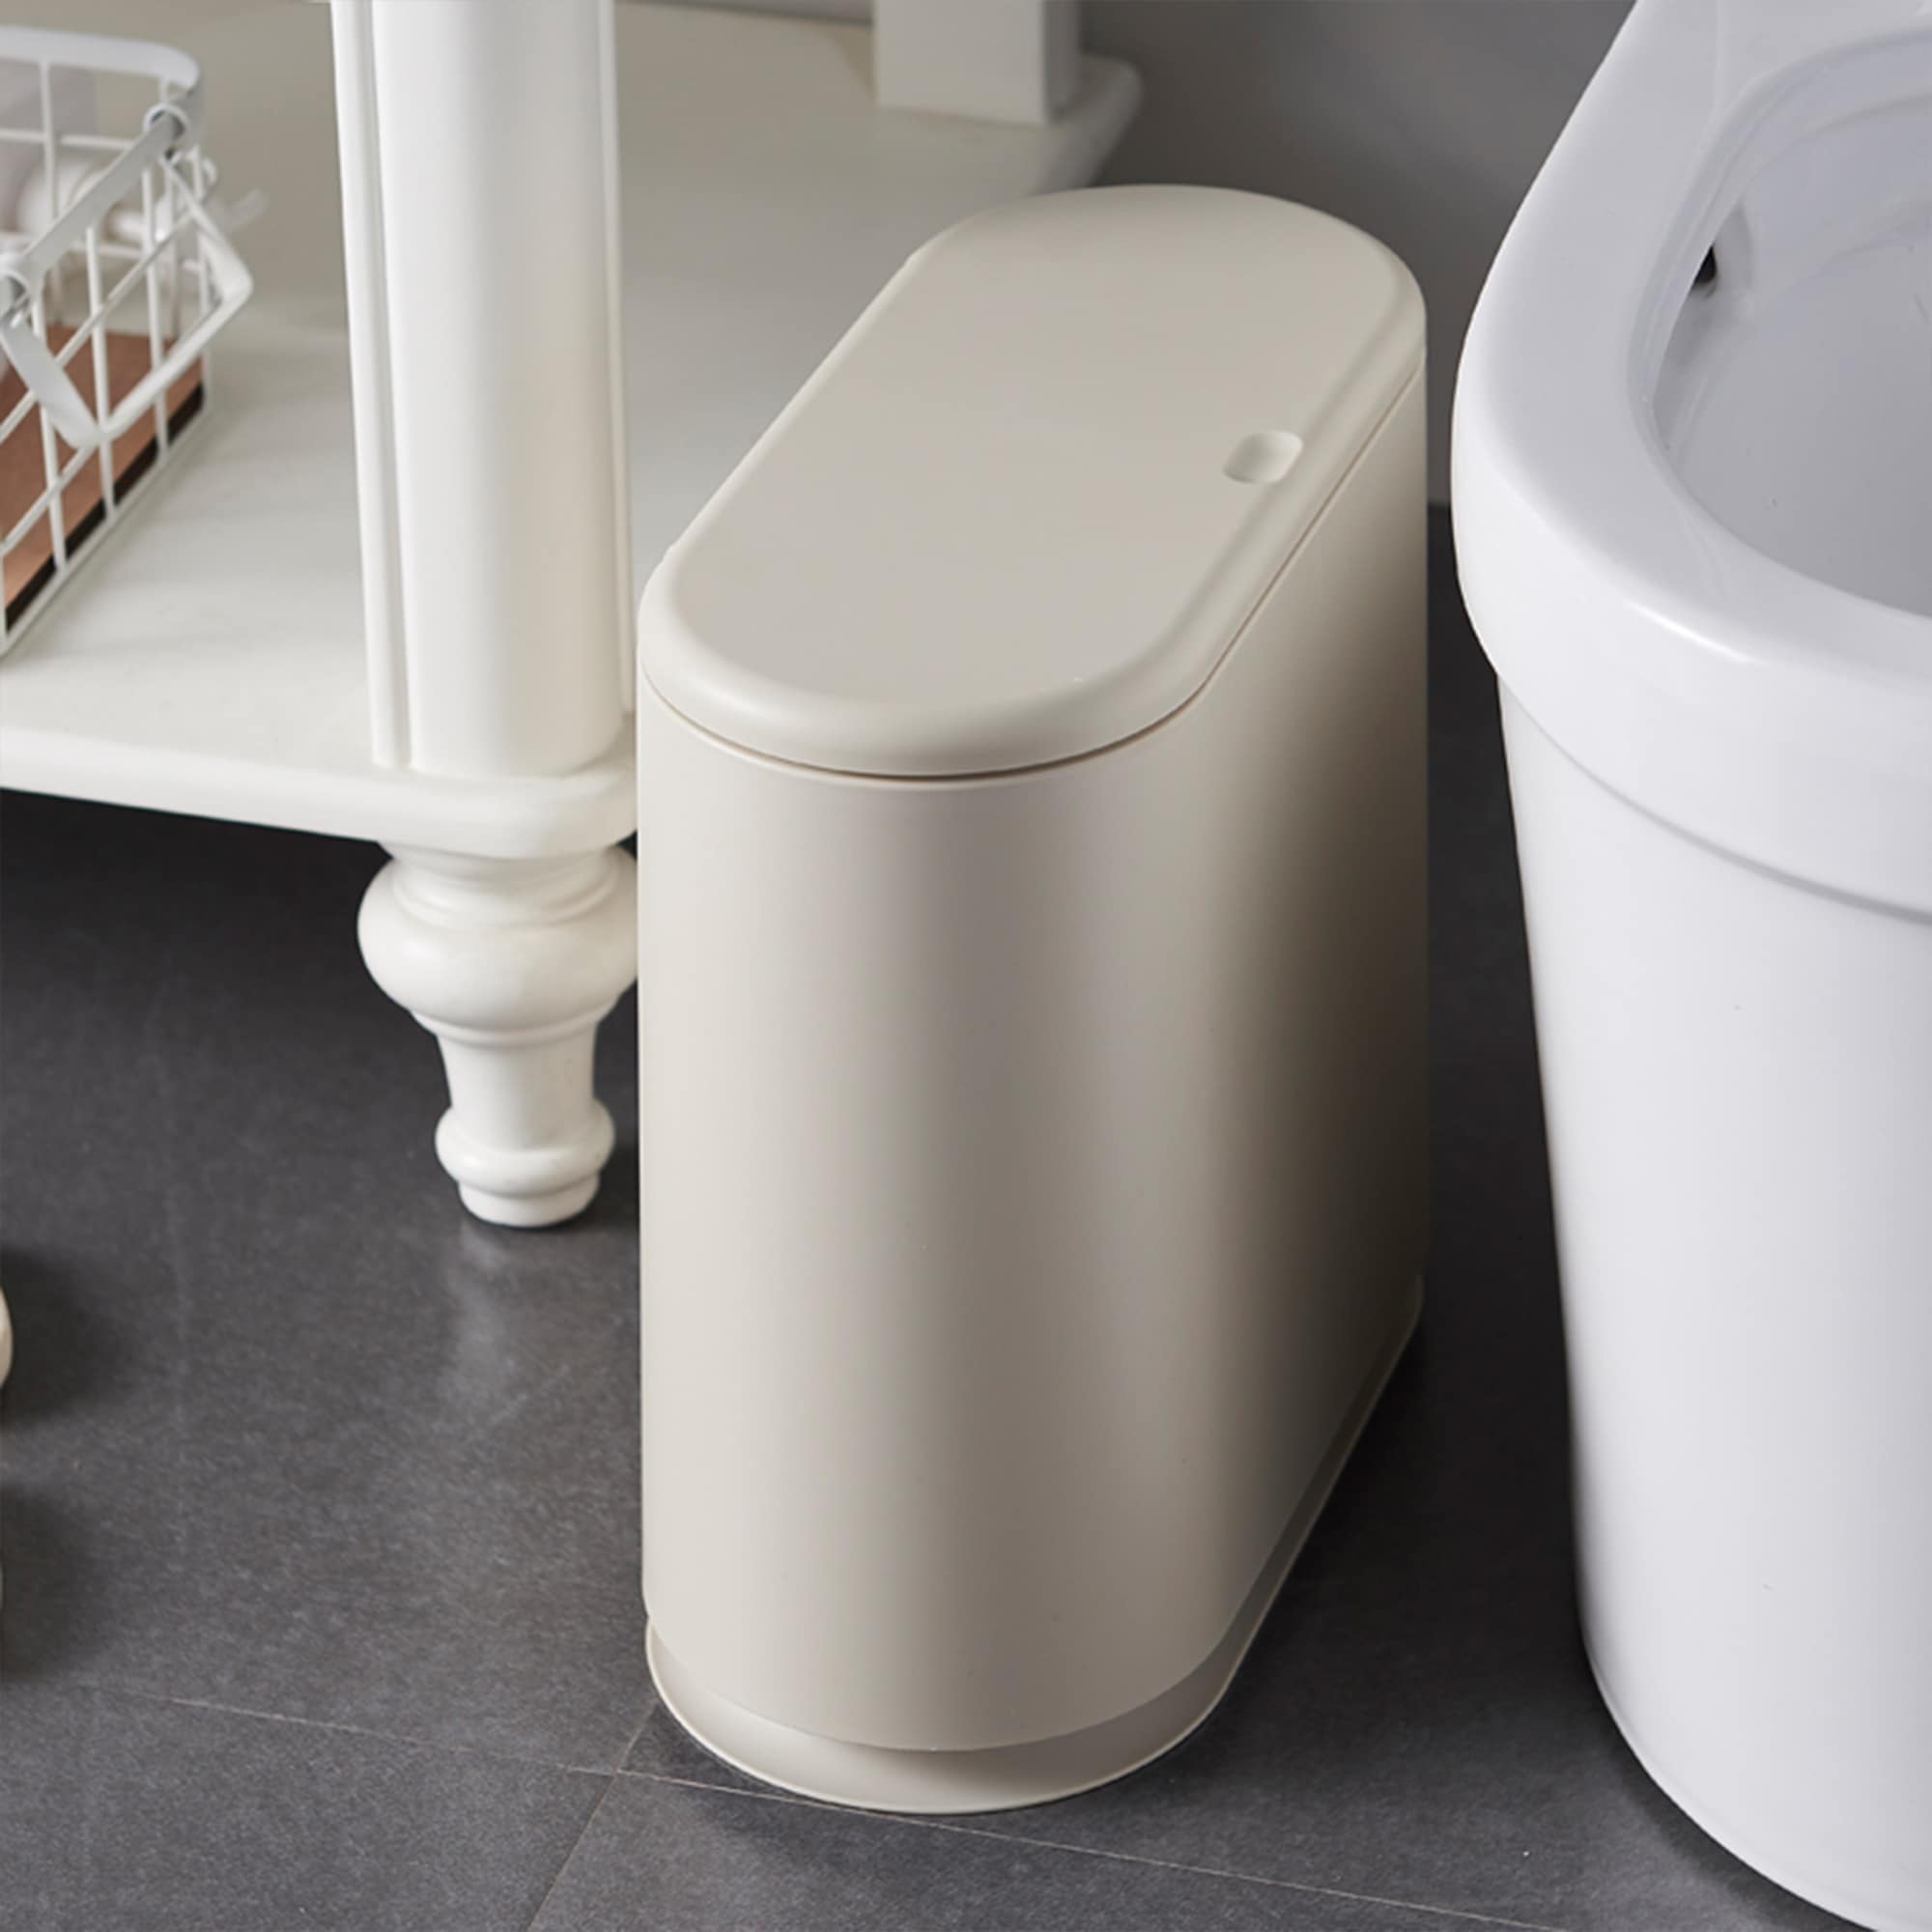 https://ak1.ostkcdn.com/images/products/is/images/direct/16c2a3484f965627ea6df40ef8e31709ace21925/HANAMYA-8-Liter-Slim-Trash-Can-with-Press-Top-Lid%2C-Garbage-Bin%2C-for-Home%2C-Office%2C-Bathroom.jpg